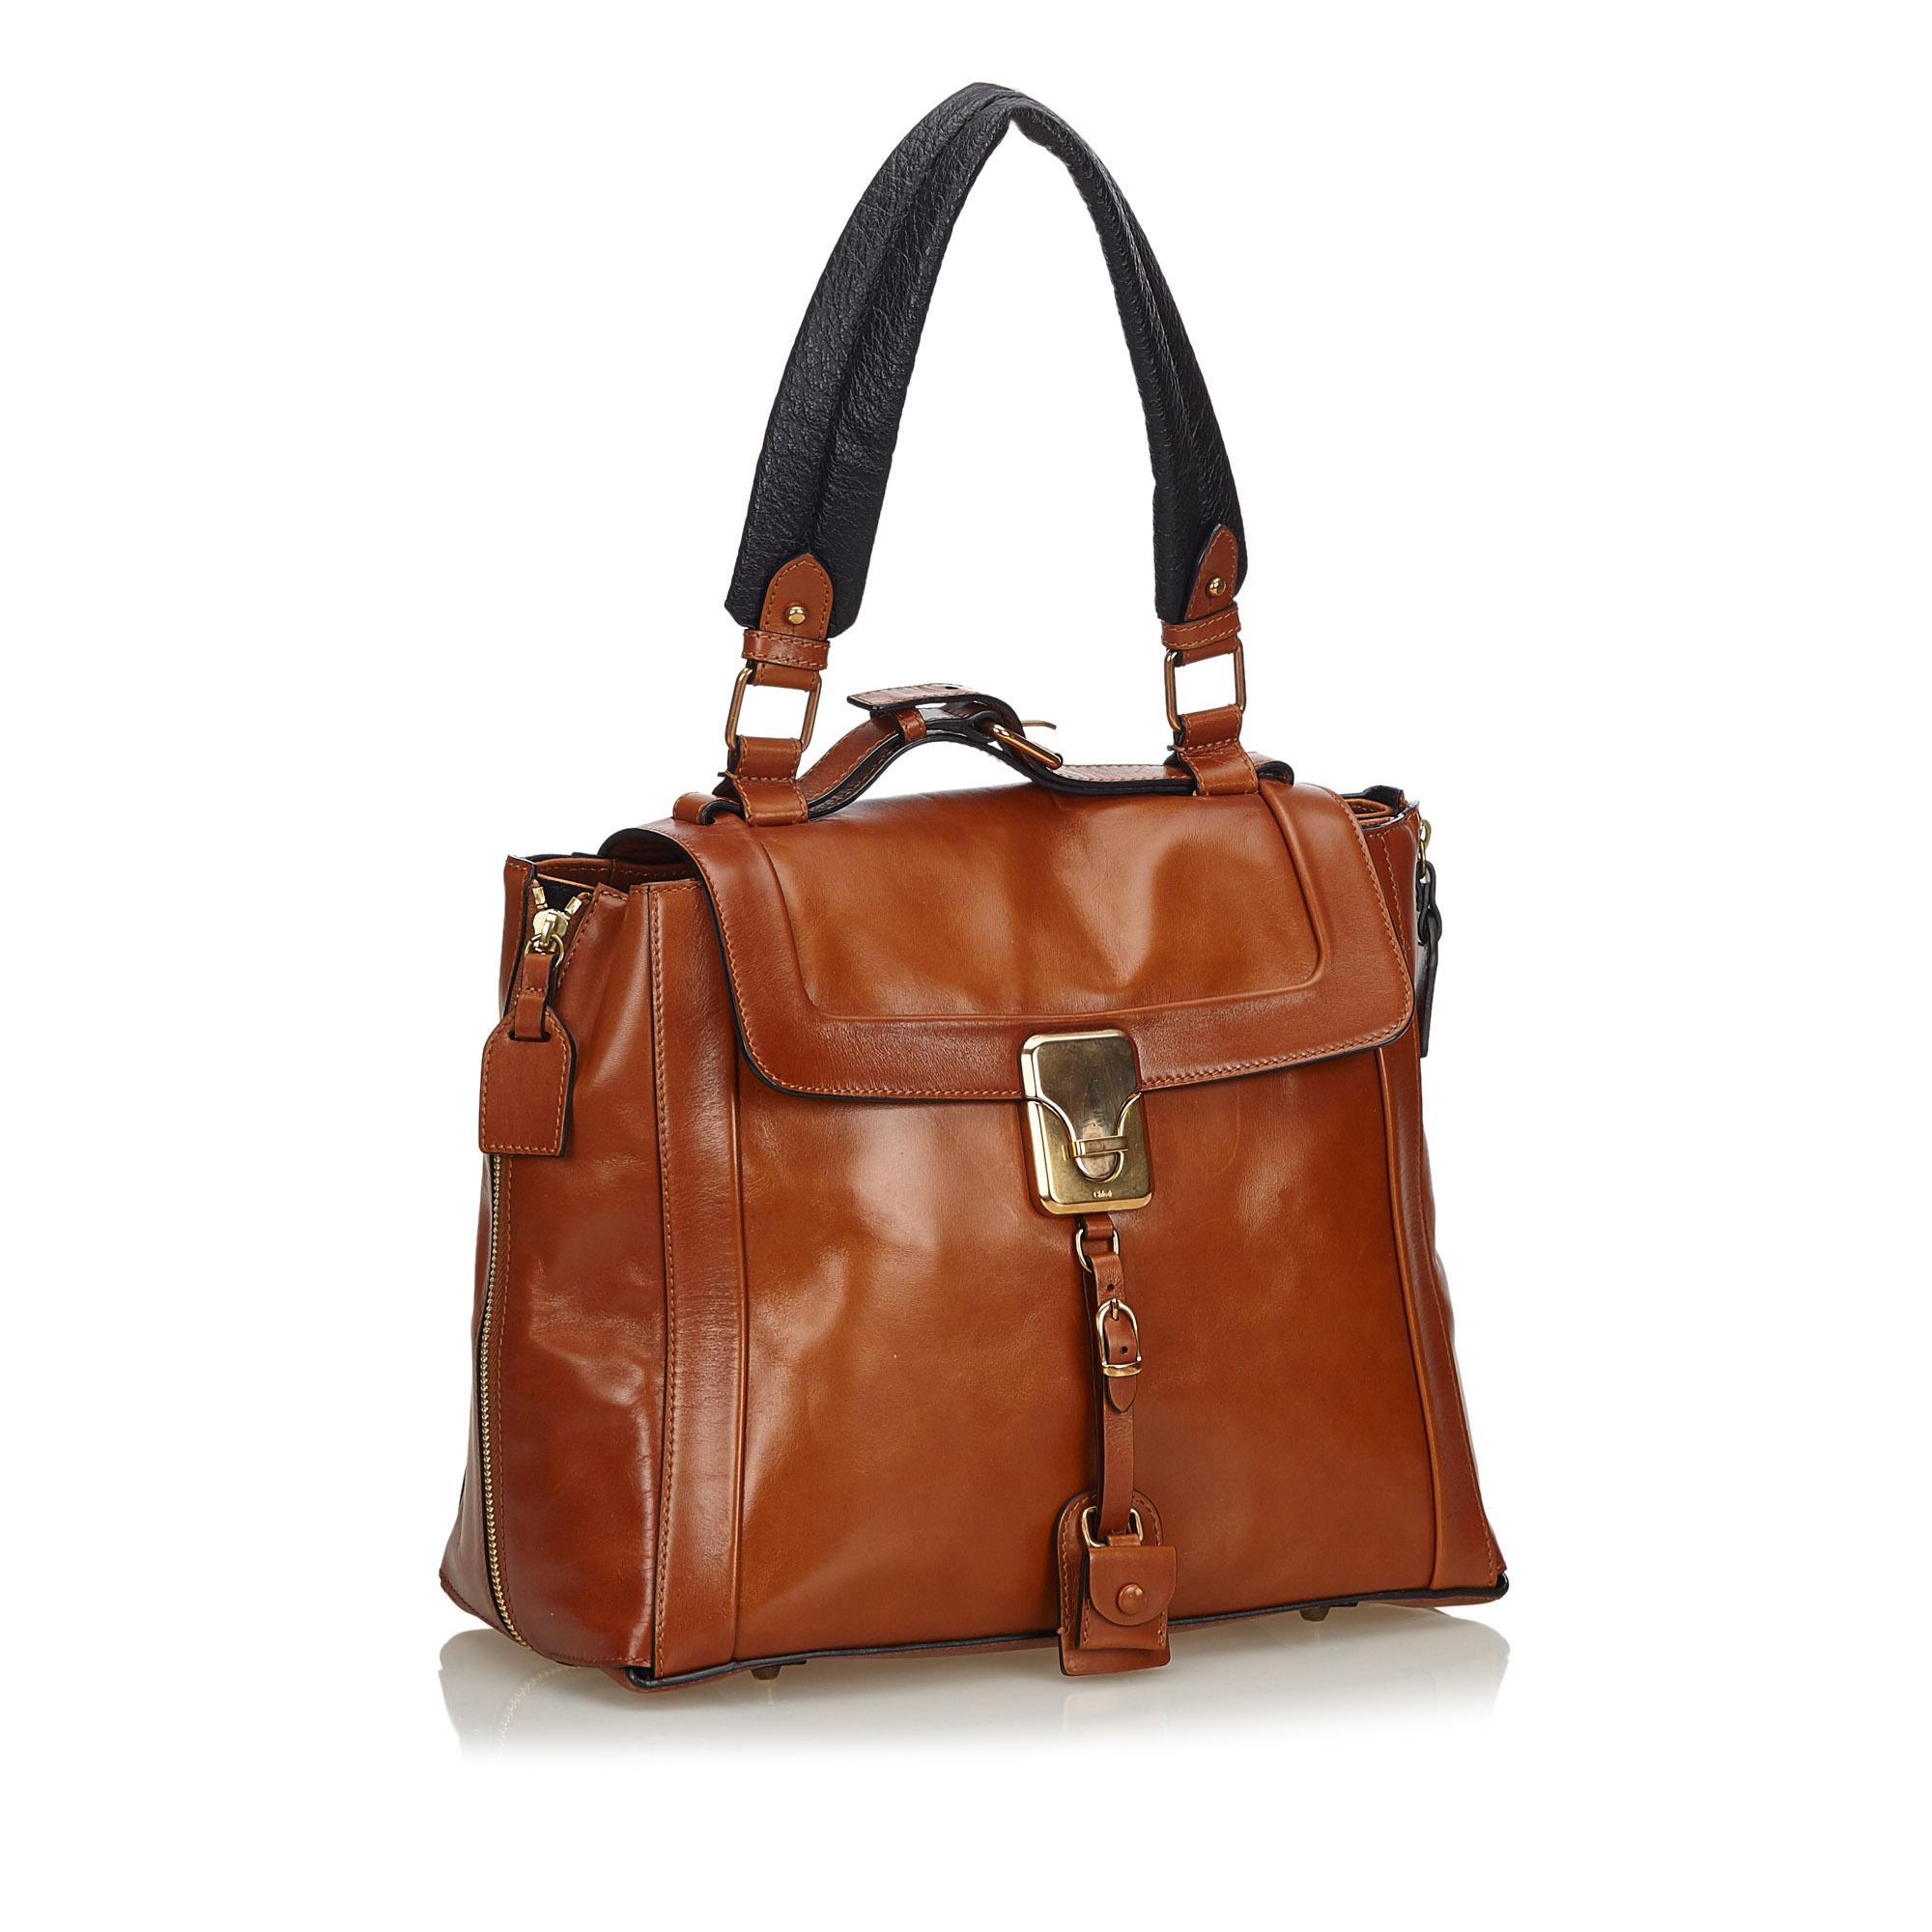 This tote bag features a leather body with side zip details, a flat leather strap, a top flap with a metal closure, and an interior zip pocket. It carries as B+ condition rating.

Inclusions: 
This item does not come with